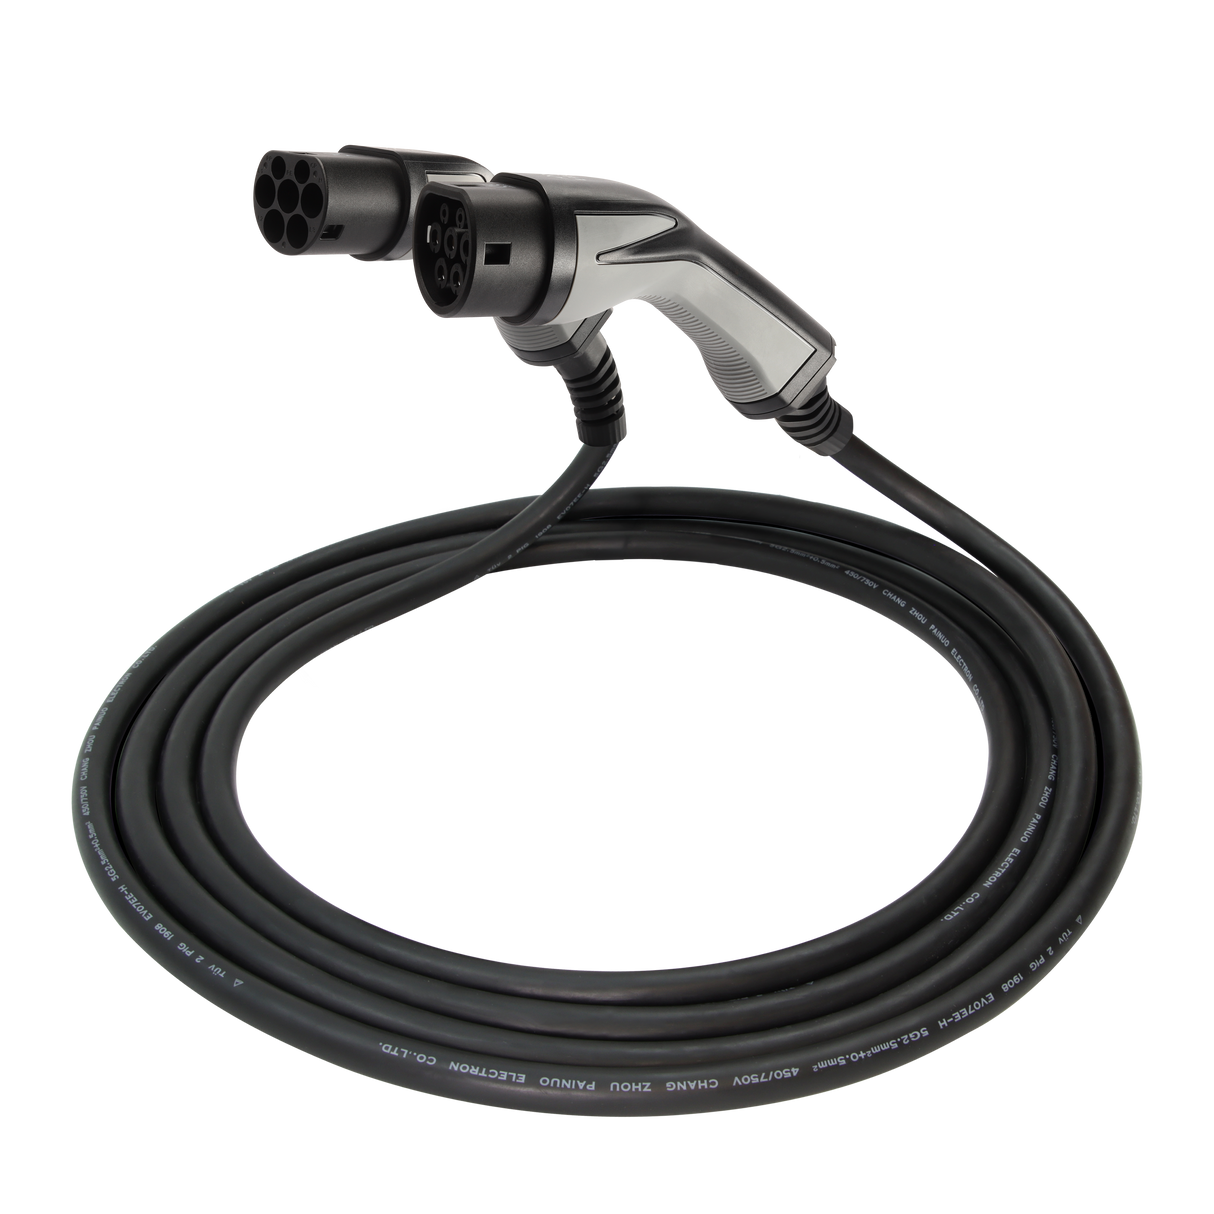 Charging cable Peugeot E -3008 - Erock Pro Type 2 - 16A 3 phase (11 kW)